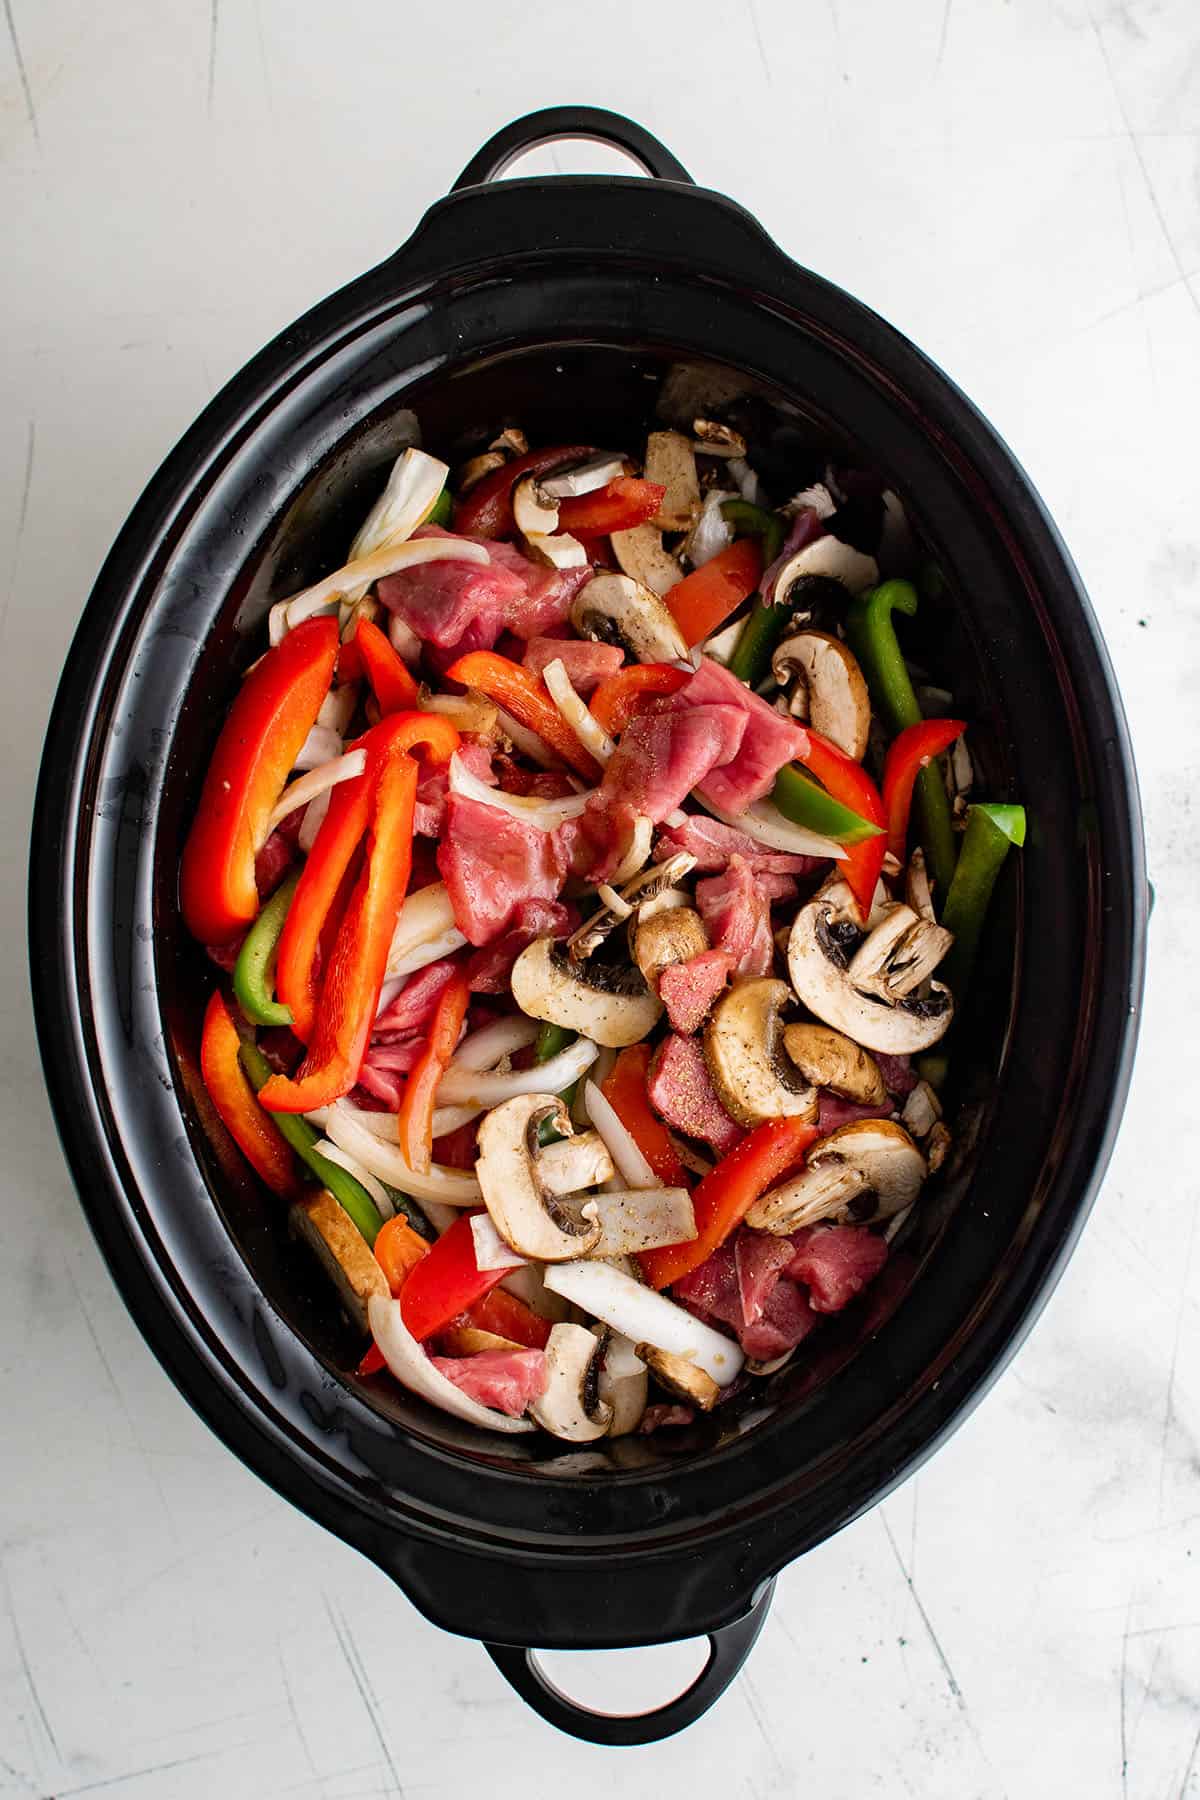 ingredients for pepper steak in the slow cooker